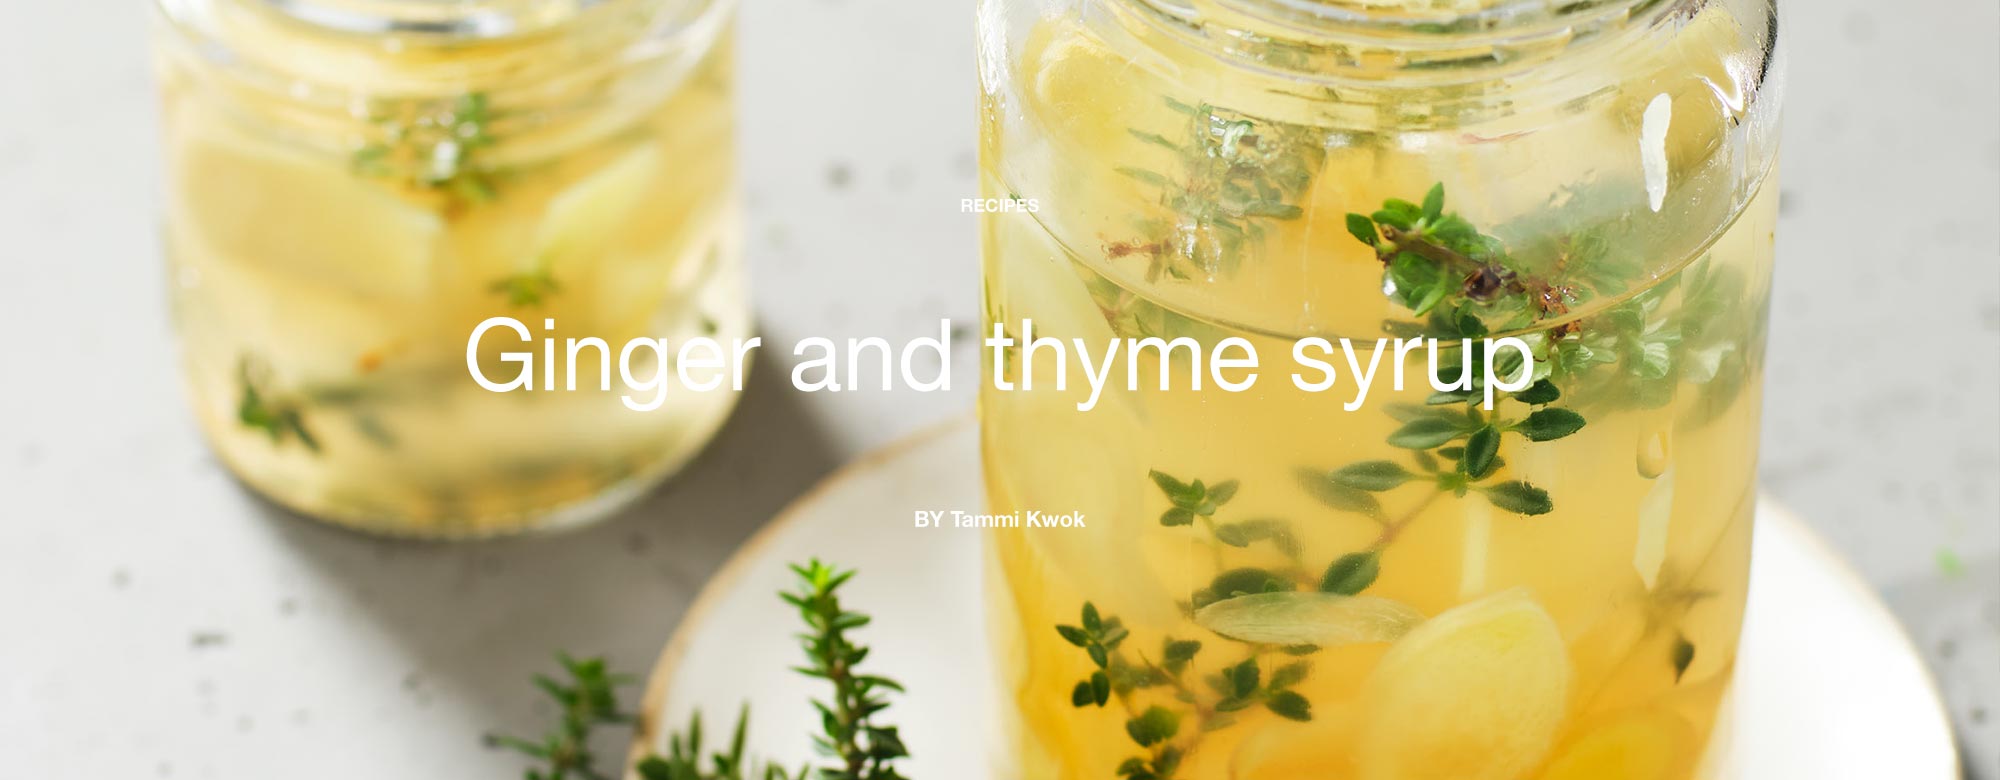 Ginger and thyme syrup